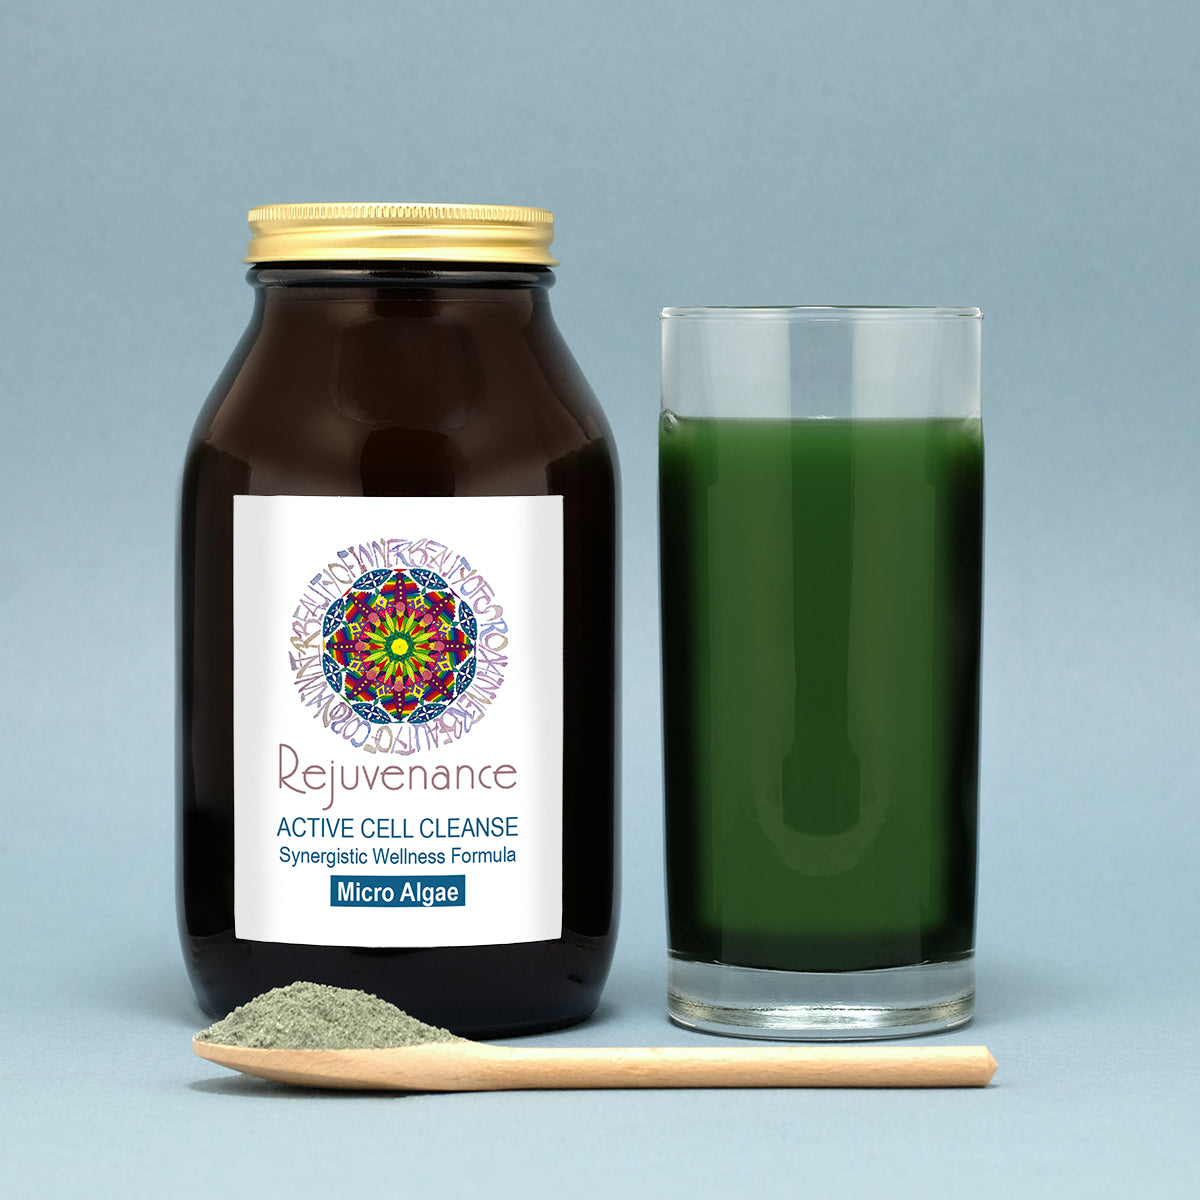 Rejuvenance Active Cell Cleanse with Microalgae | The Clay Cure | Raw Living UK | The Clay Cure Rejuvenance Active Cell Cleanse with Microalgae is a proprietary blend of Clinoptilolite, Green Superfoods, Vitamins, Minerals, and Amino Acids.